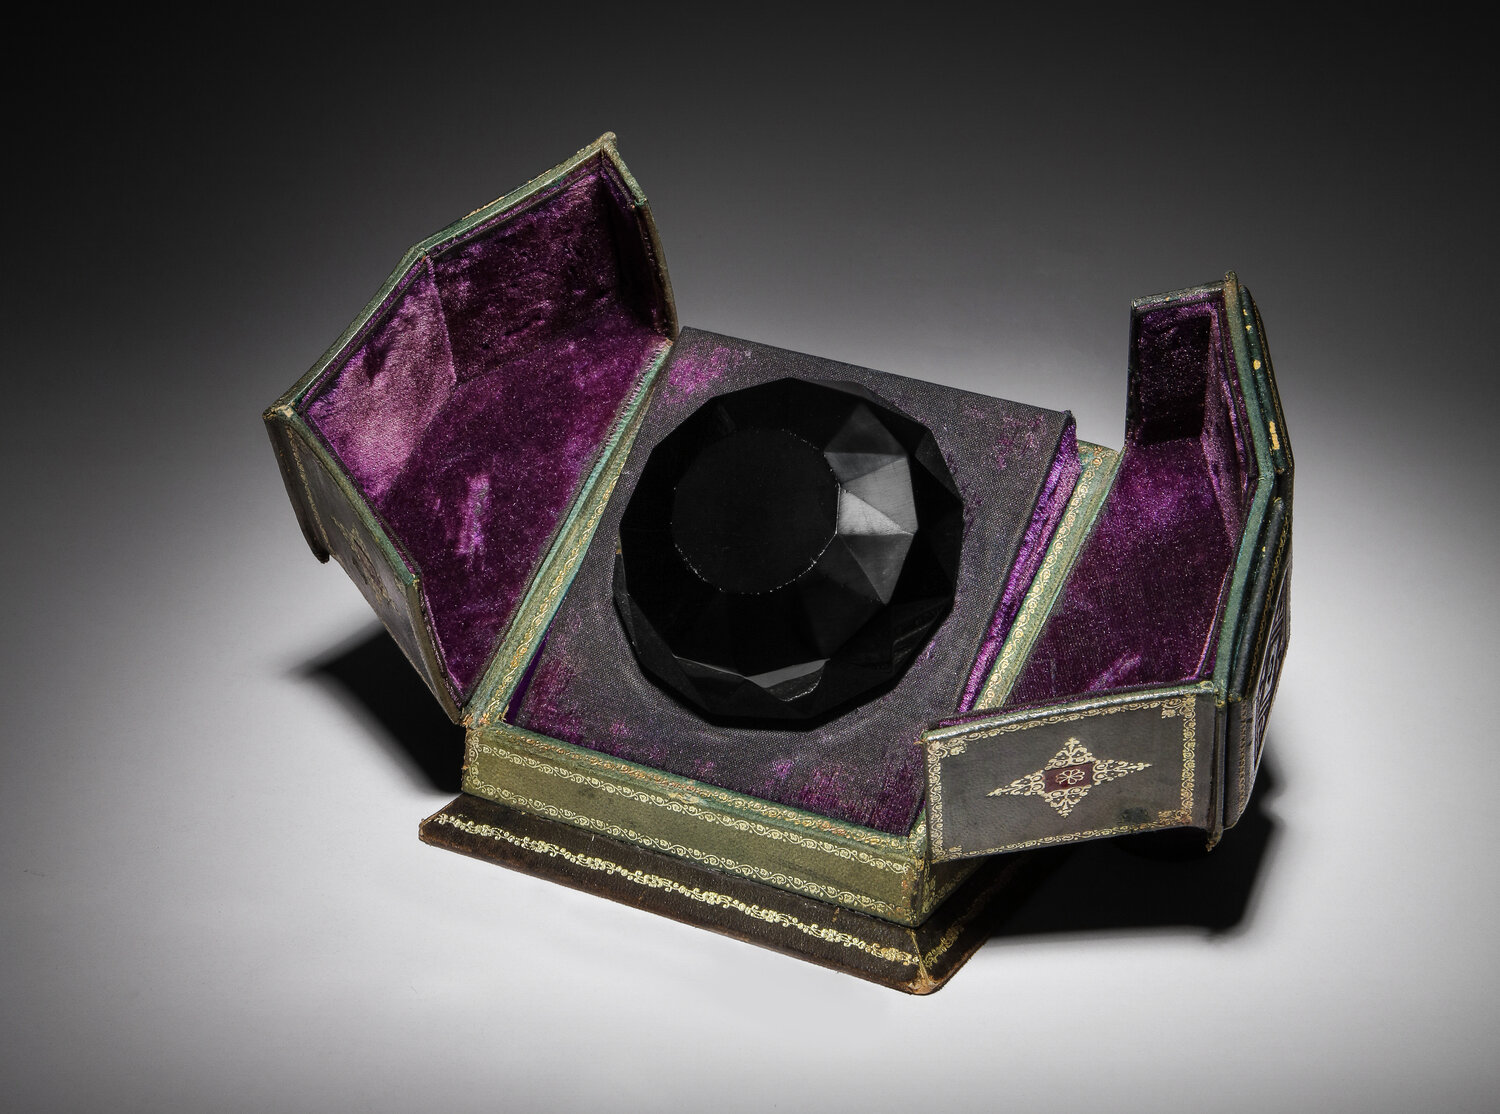 Baccarat black crystal perfume bottle from 1926: Tresor Cache “lys” by Isabey